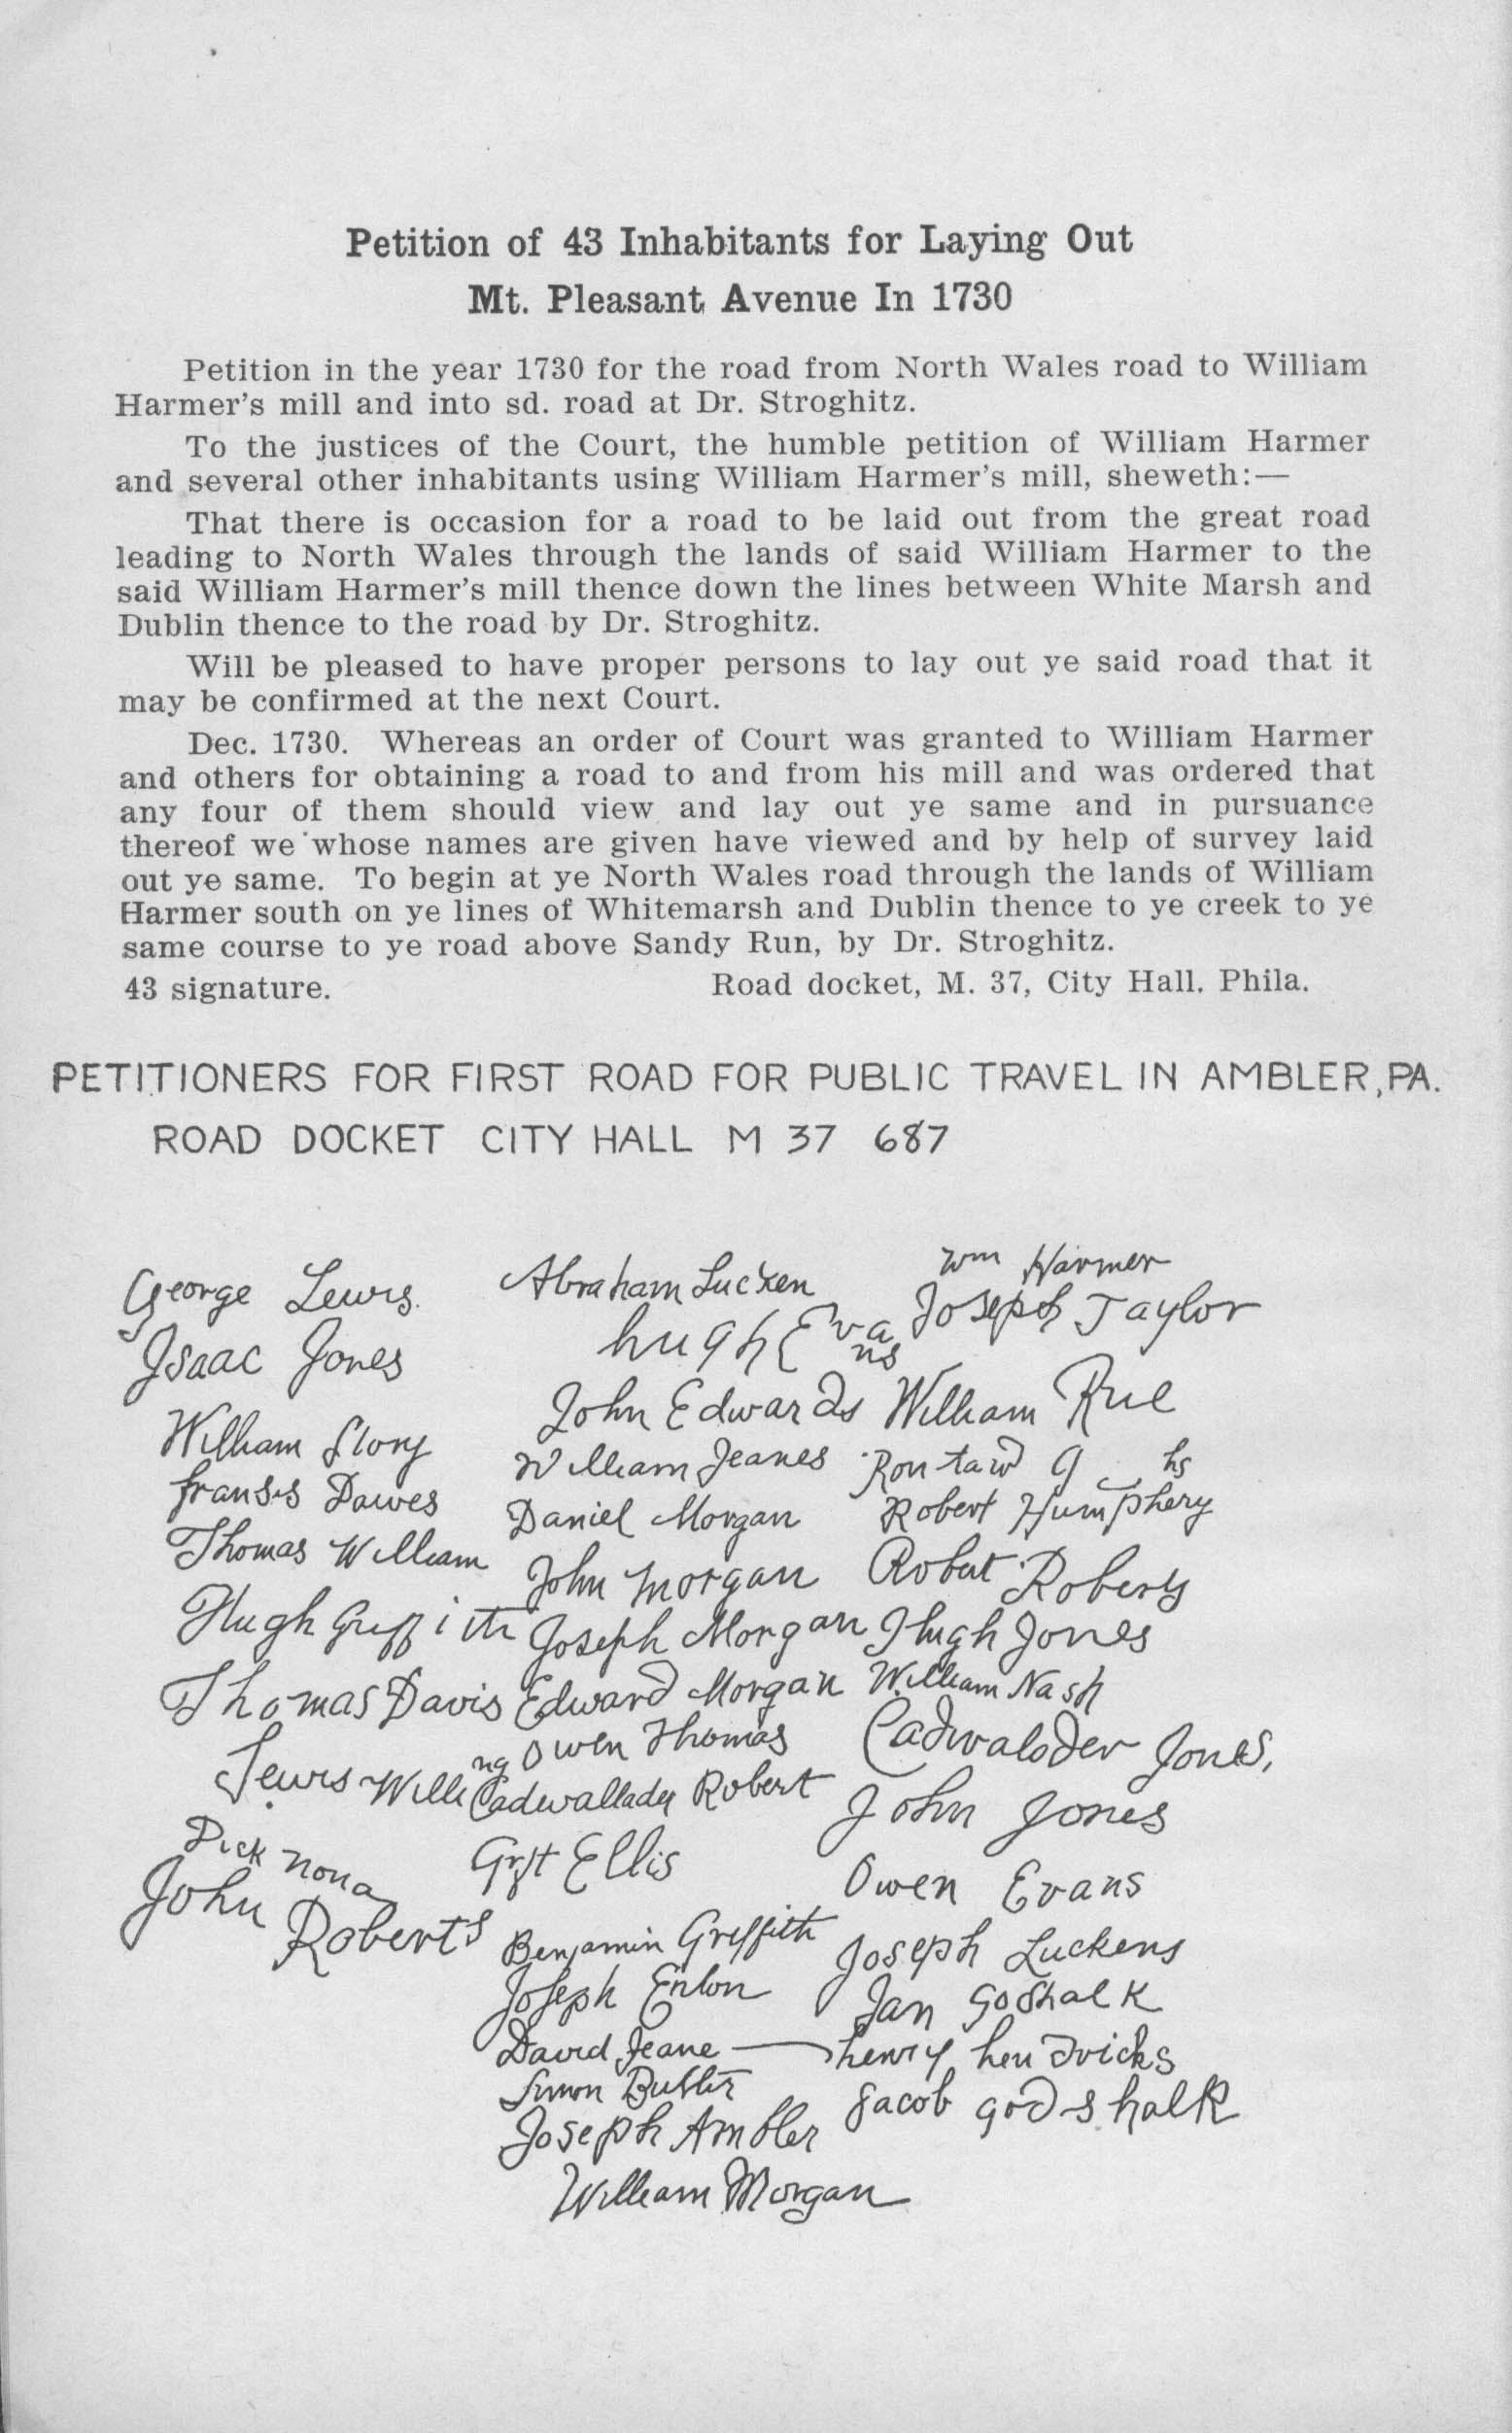 Petition of 43 Inhabitants for Laying Out Mt. Pleasant Avenue In 1730
       
       Petition in the year 1730 for the road from North Wales road to William Banner's mill and into sd. road at Dr. Stroghitz.
       
       To the justices of the Court, the humble petition of William Harmer and several other inhabitants using William Harmer's mill, sheweth: — 
       
       That there is occasion for a road to be laid out from the great road leading to North Wales through the lands of said William Harmer to the said William Harmer's mill thence down the lines between White Marsh and Dublin thence to the road by Dr. Stroghitz.
       
       Will be pleased to have proper persons to lay out ye said road that it may be confirmed at the next Court.
       
       Dec. 1730. Whereas an order of Court was granted to William Harmer and others for obtaining a road to and from his mill and was ordered that any four of them should view and lay out ye same and in pursuance thereof we whose names are given have viewed and by help of survey laid out ye same. To begin at ye North Wales road through the lands of William Harmer south on ye lines of Whitemarsh and Dublin thence to ye creek to ye same course to ye road above Sandy Run, by Dr. Stroghitz. 43 signature.                                   Road docket, M. 37, City Hall. Phila.
       
       Petitioners for first road for public travel in Ambler, Pa. Road Docket City Hall M 37 687
       